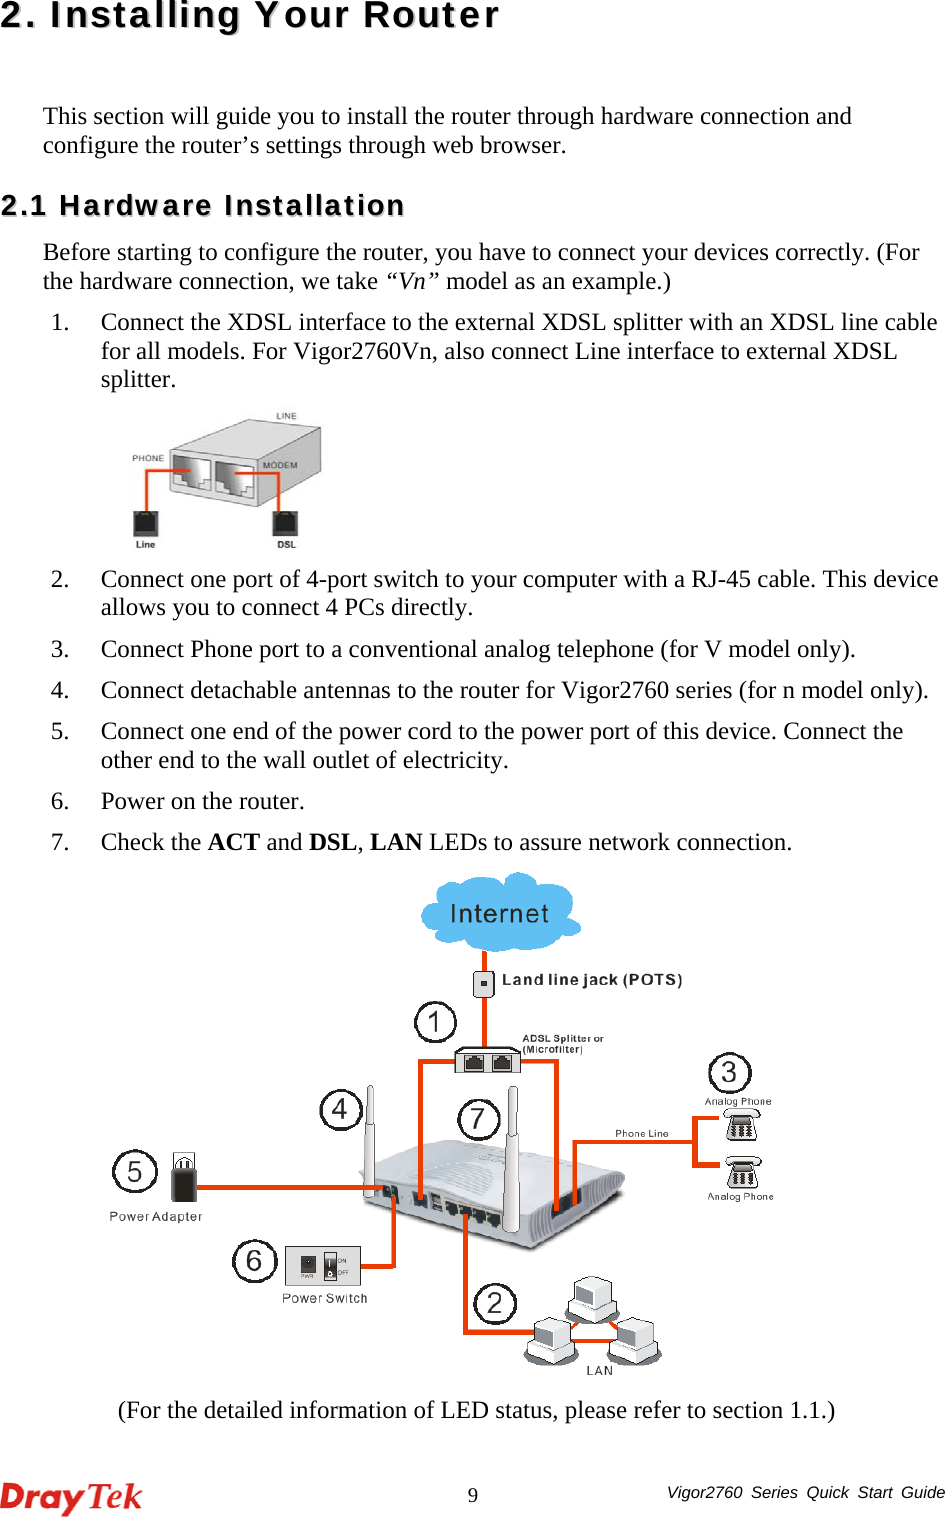  Vigor2760 Series Quick Start Guide 922..  IInnssttaalllliinngg  YYoouurr  RRoouutteerr  This section will guide you to install the router through hardware connection and configure the router’s settings through web browser.   22..11  HHaarrddwwaarree  IInnssttaallllaattiioonn  Before starting to configure the router, you have to connect your devices correctly. (For the hardware connection, we take “Vn” model as an example.) 1. Connect the XDSL interface to the external XDSL splitter with an XDSL line cable for all models. For Vigor2760Vn, also connect Line interface to external XDSL splitter.  2. Connect one port of 4-port switch to your computer with a RJ-45 cable. This device allows you to connect 4 PCs directly. 3. Connect Phone port to a conventional analog telephone (for V model only).   4. Connect detachable antennas to the router for Vigor2760 series (for n model only). 5. Connect one end of the power cord to the power port of this device. Connect the other end to the wall outlet of electricity. 6. Power on the router. 7. Check the ACT and DSL, LAN LEDs to assure network connection.  (For the detailed information of LED status, please refer to section 1.1.) 